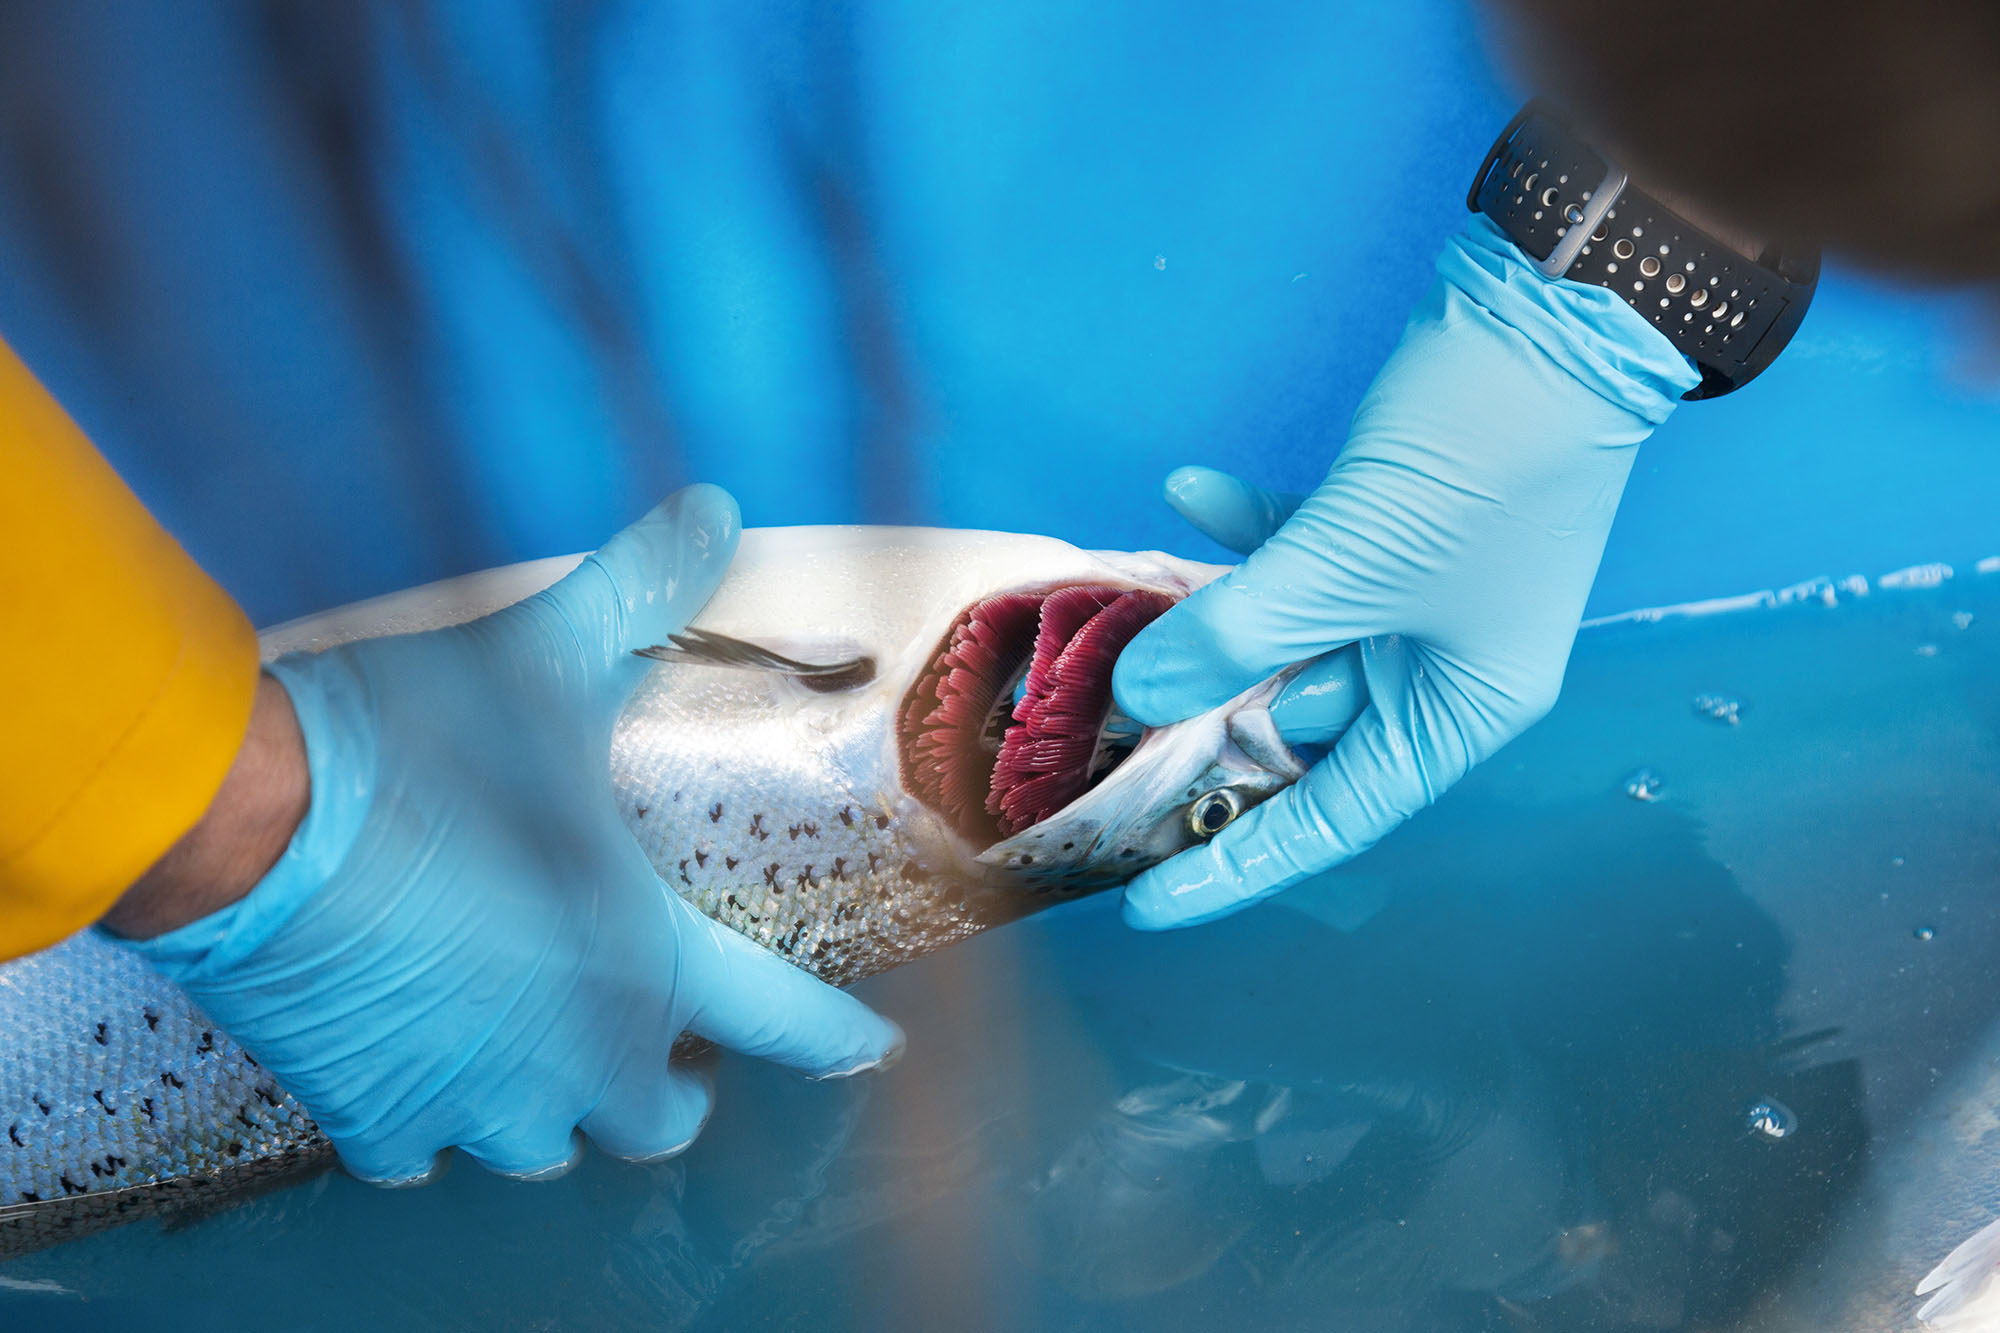 Fish veterinarian Christopher Matthews gently inspects the gills of a salmon. Catching signs of infection early provides the 'best chance' of successful treatment.